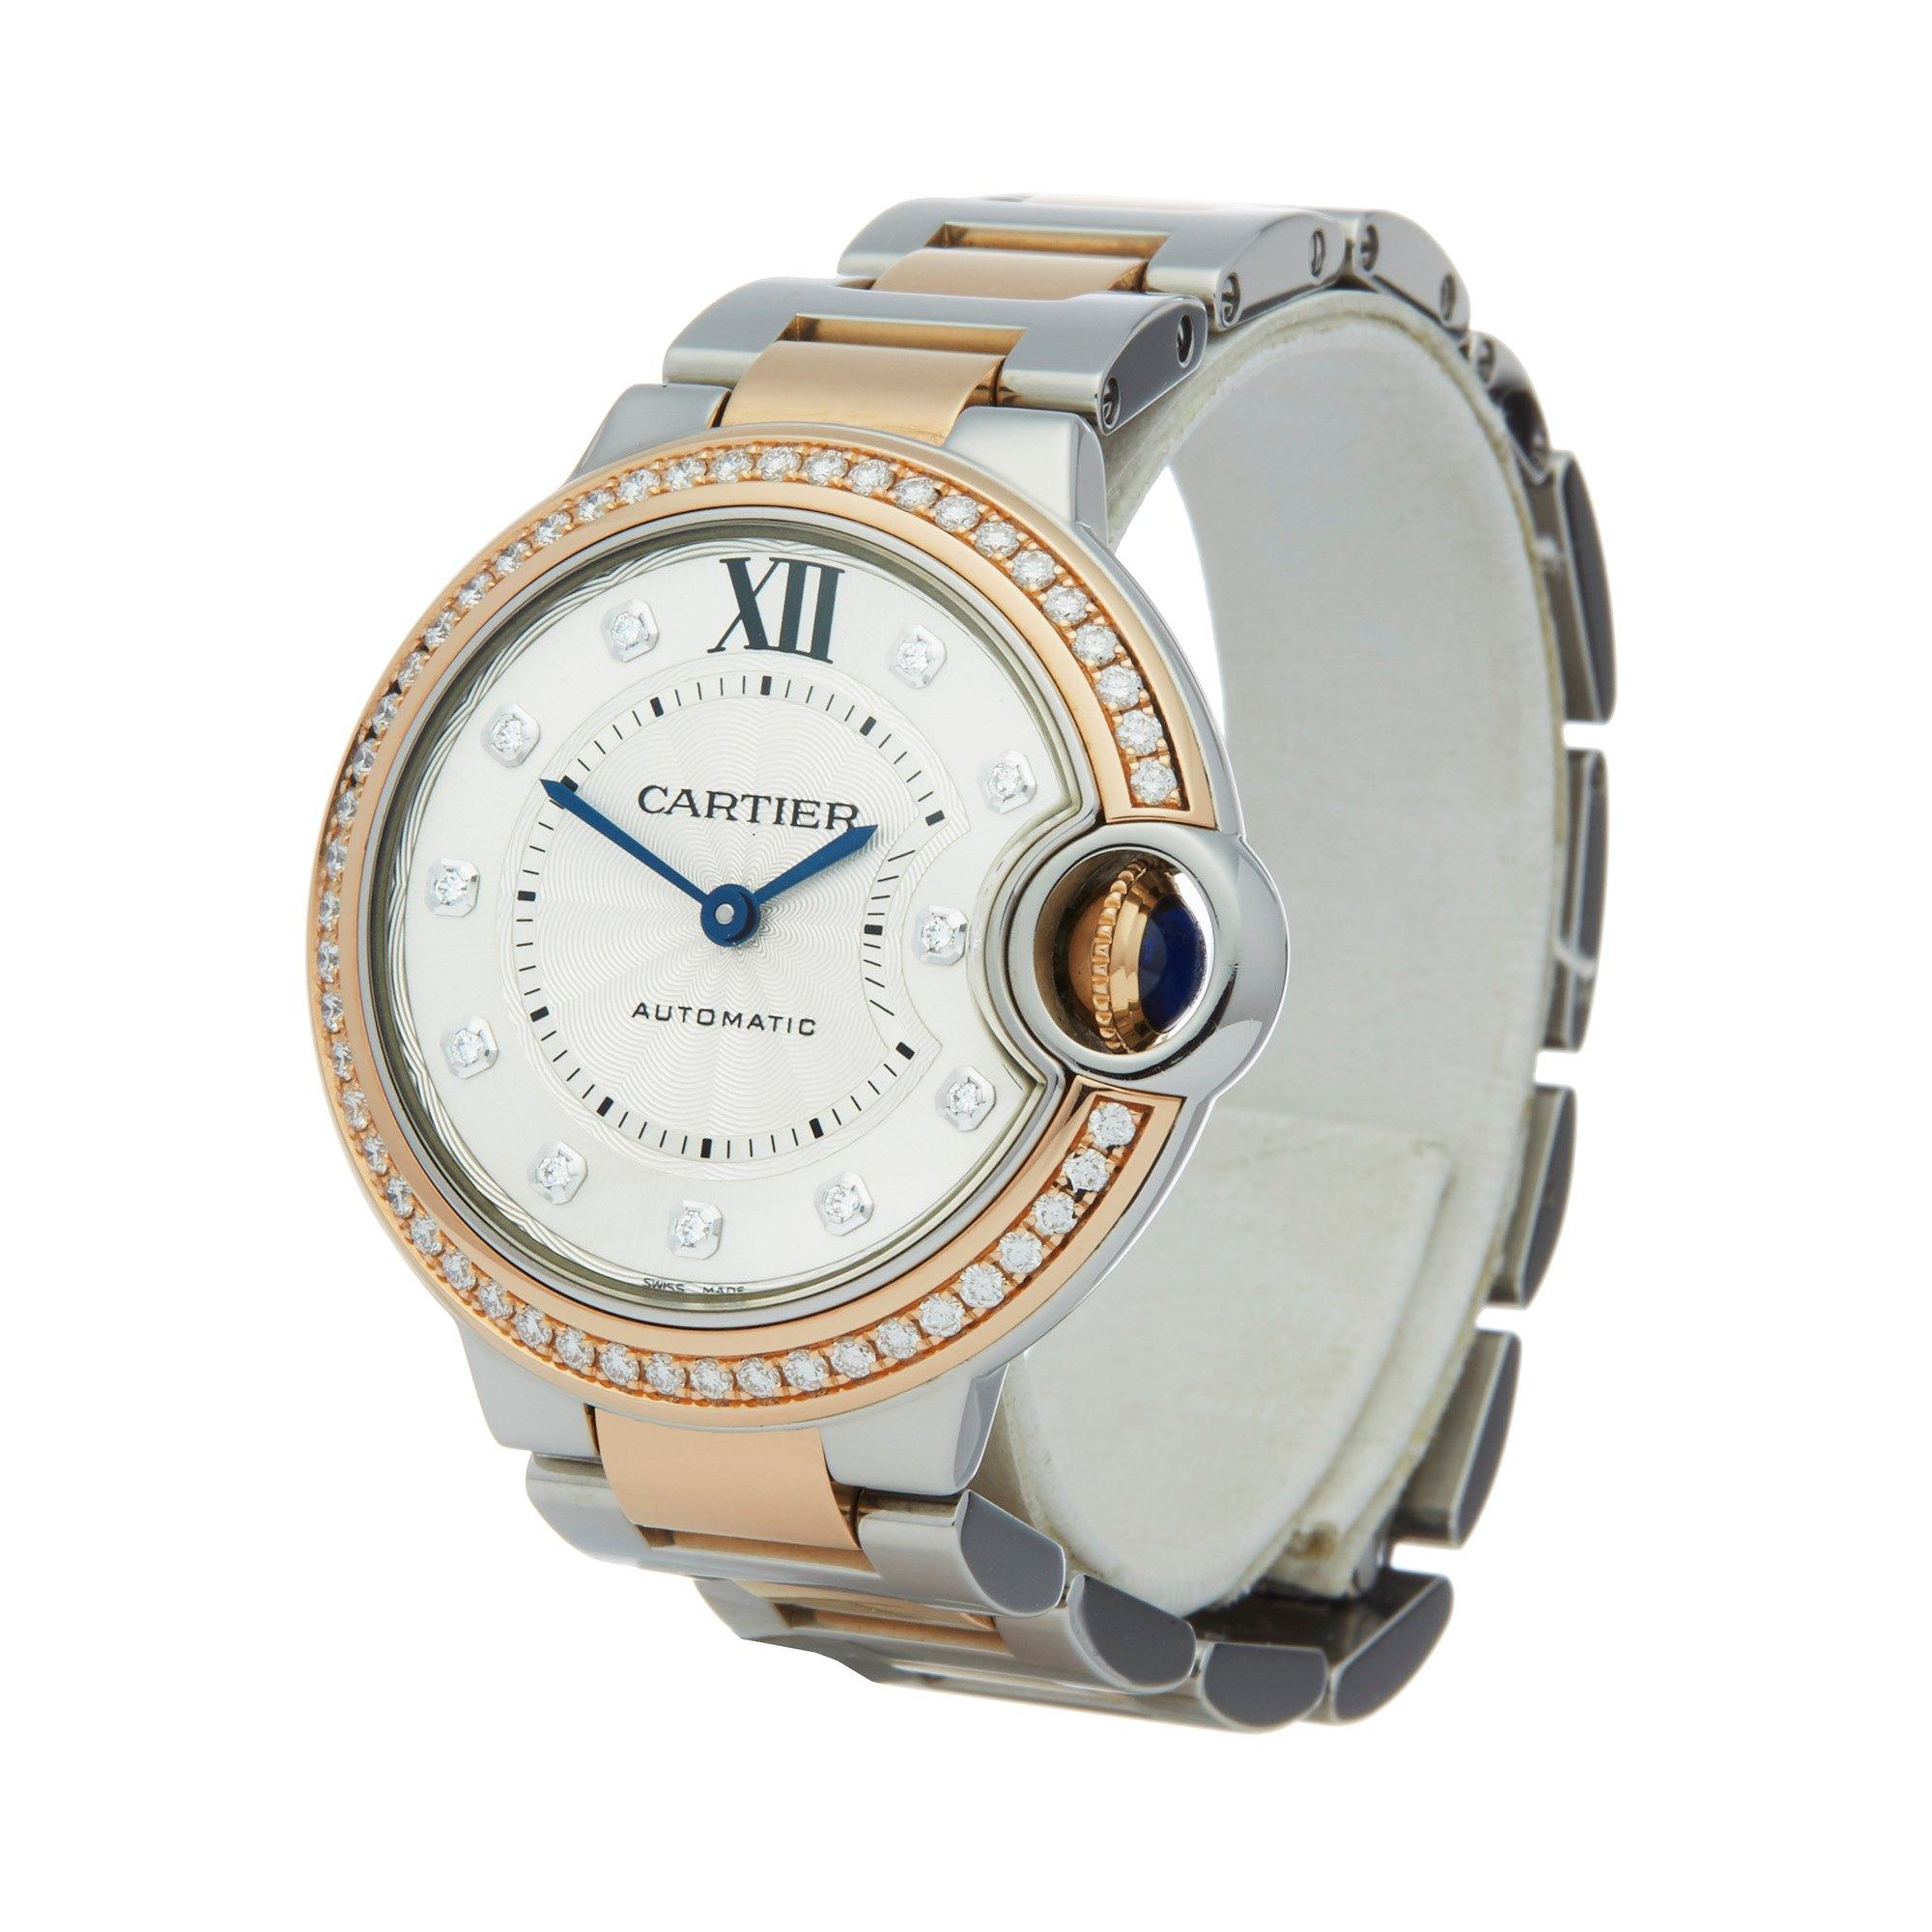 Xupes Reference: W007355
Manufacturer: Cartier
Model: Ballon Bleu
Model Variant: 33mm
Model Number: WE902077 or 3753
Age: 03-01-2019
Gender: Ladies
Complete With: Cartier Box, Manuals & Guarantee
Dial: Silver With Diamond Markers
Glass: Sapphire